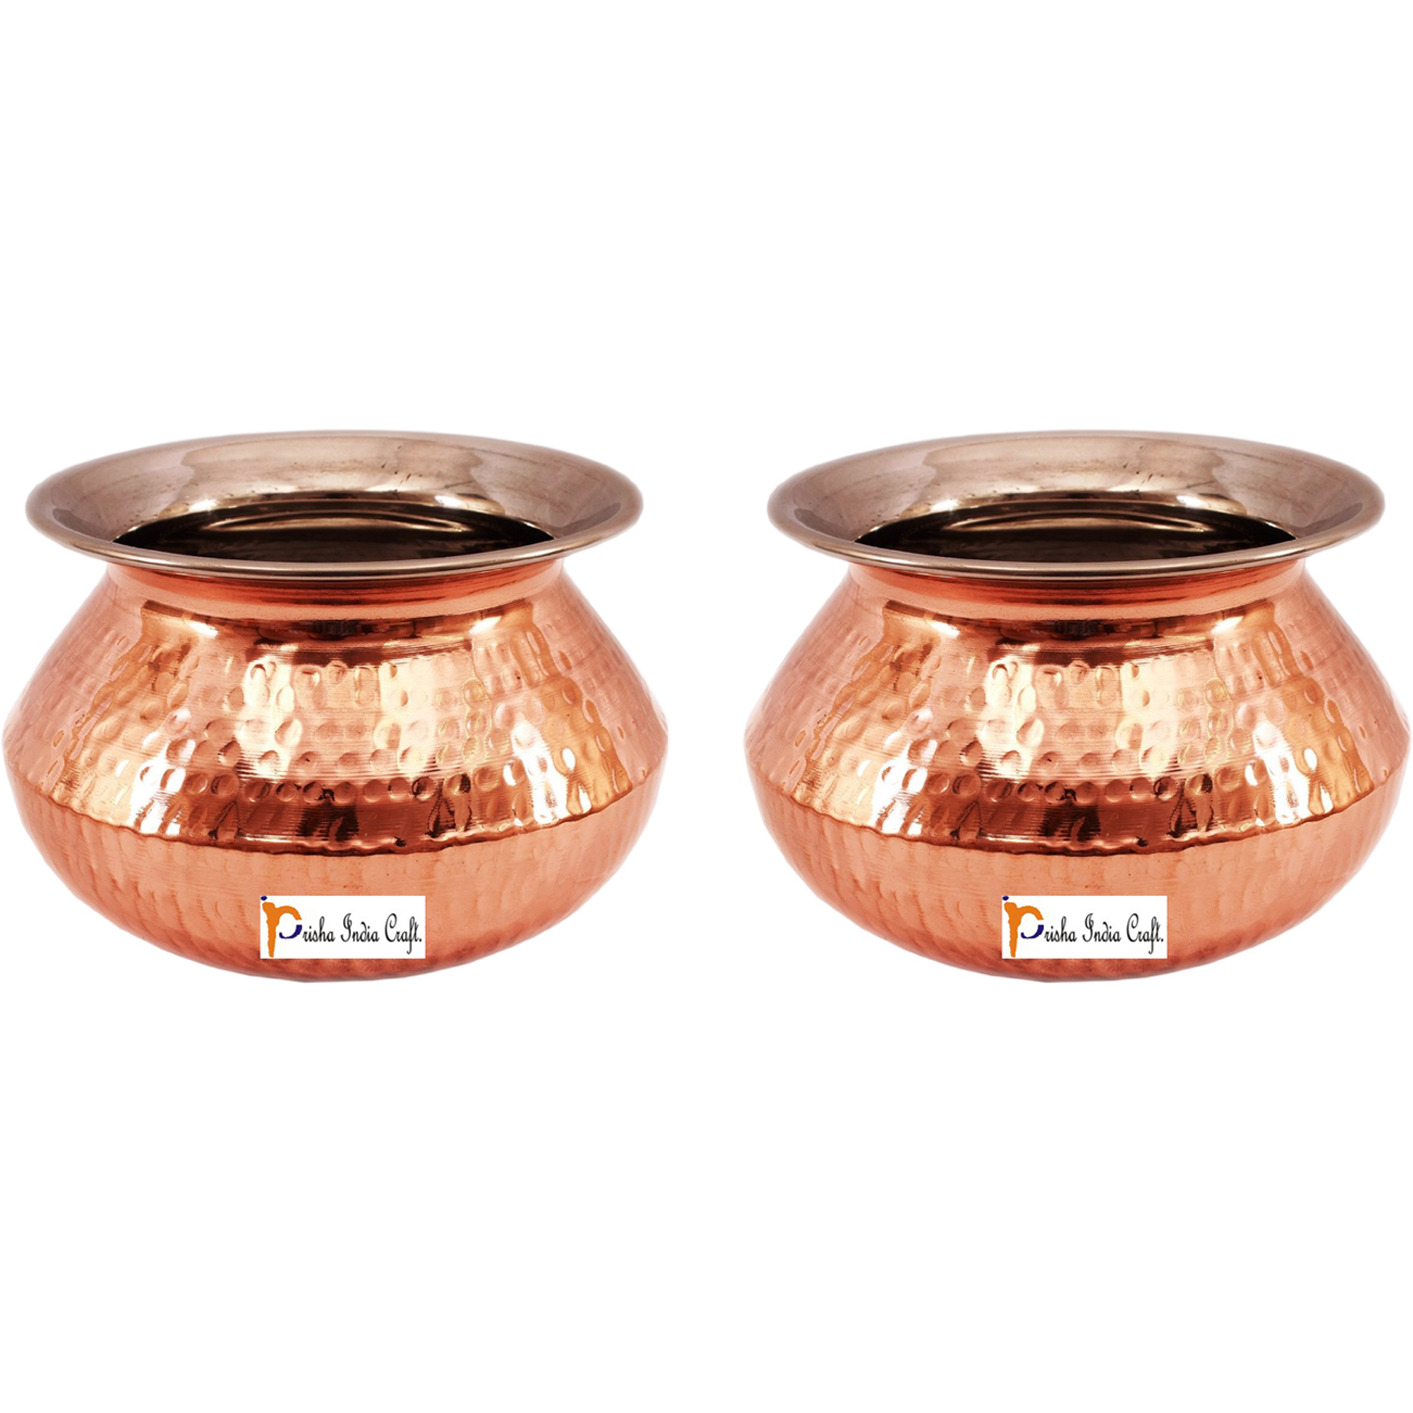 Set of 2 Prisha India Craft B. High Quality Handmade Steel Copper Casserole and Serving Spoon - Set of Copper Handi and Serving Spoon - Copper Bowl Dia - 5.5  X Height - 3.50  - Christmas Gift